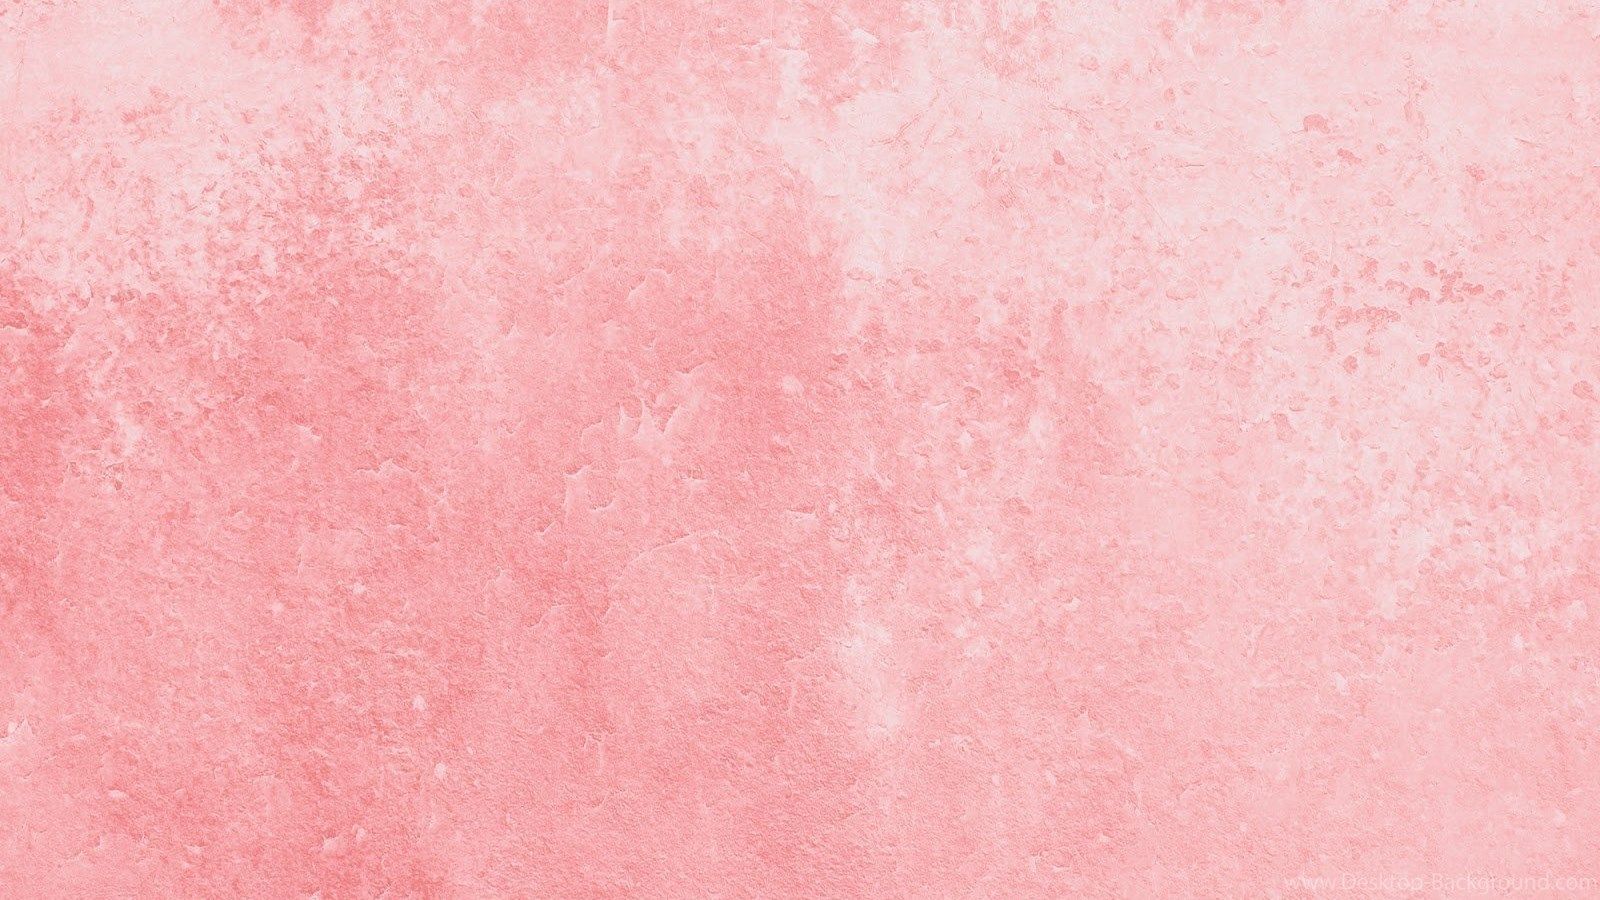 50 Free Light Pink Phone Wallpaper Backgrounds - The Clever Heart